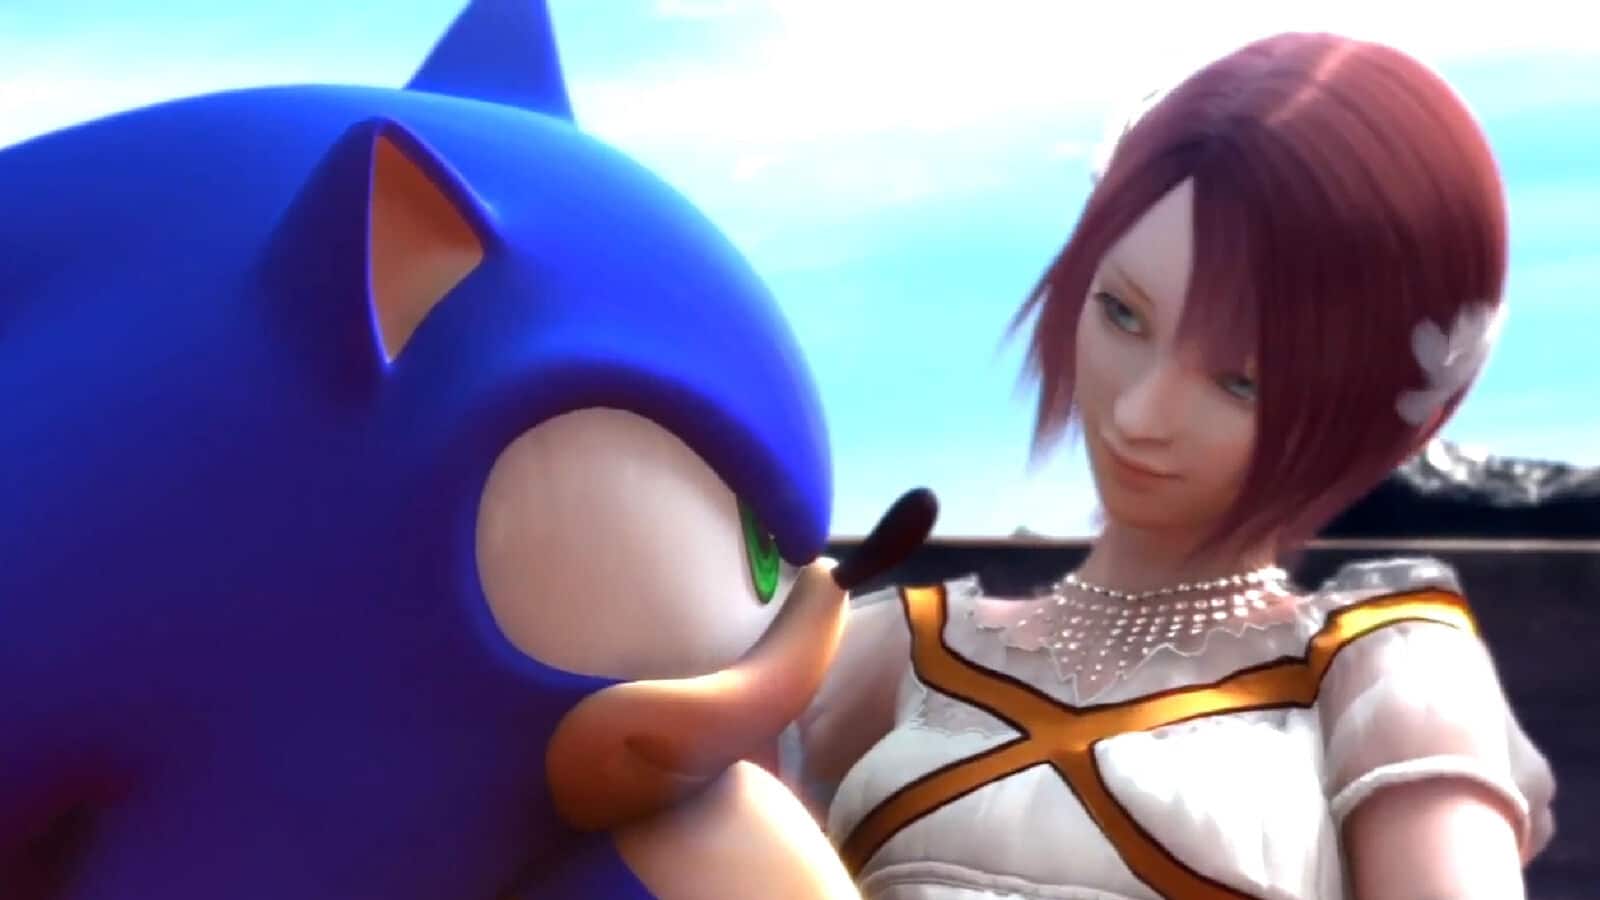 Don't worry, Sonic will never kiss a human woman again.